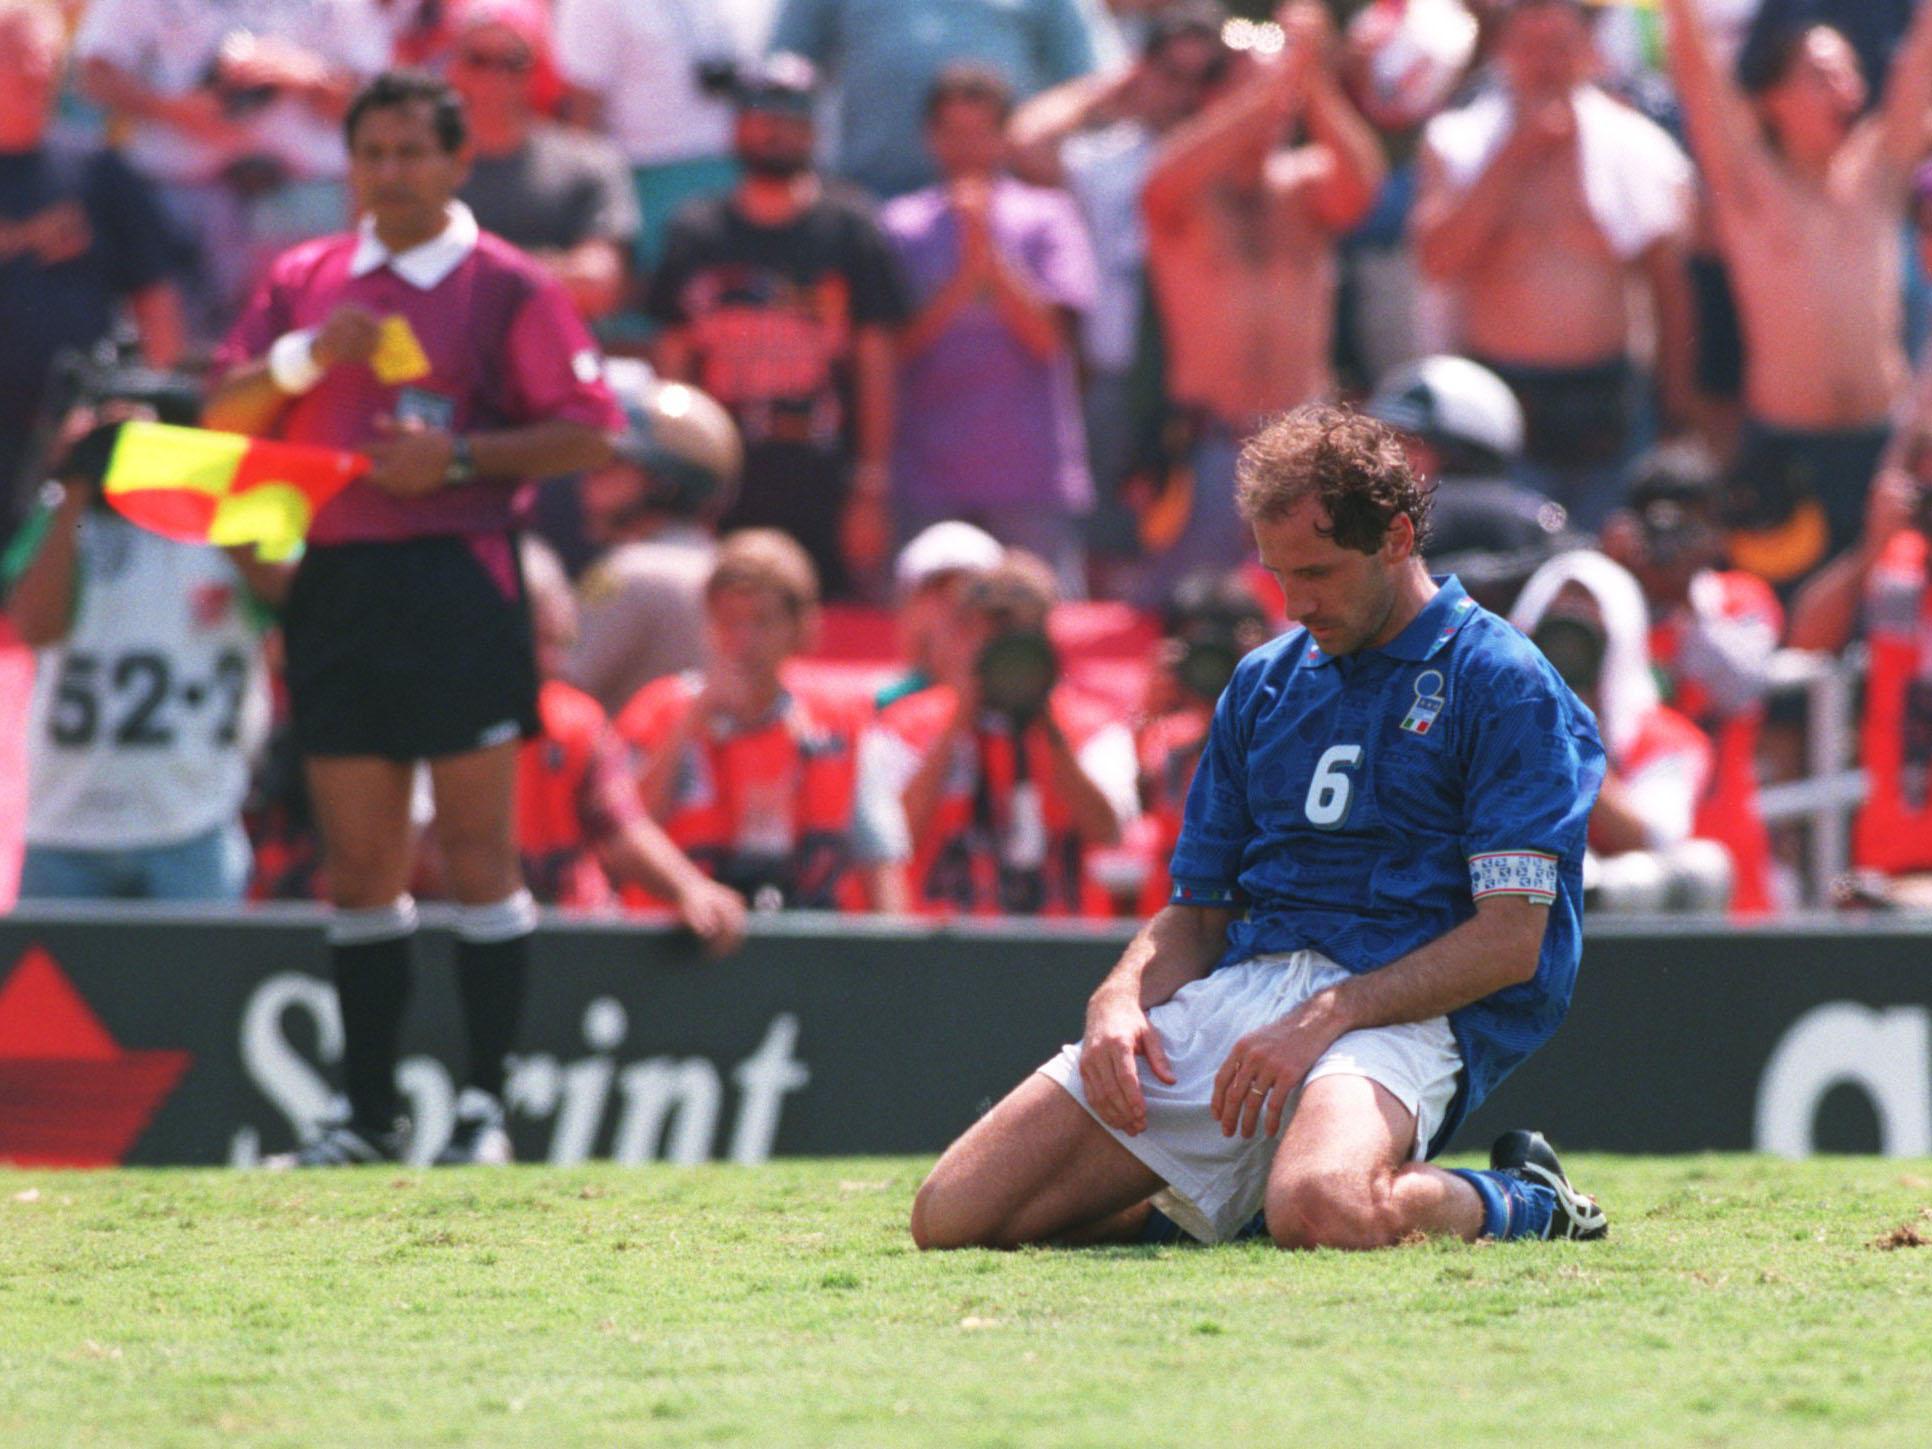 Franco Baresi, one of the league's greatest defenders, has bemoaned the switch to attacking football